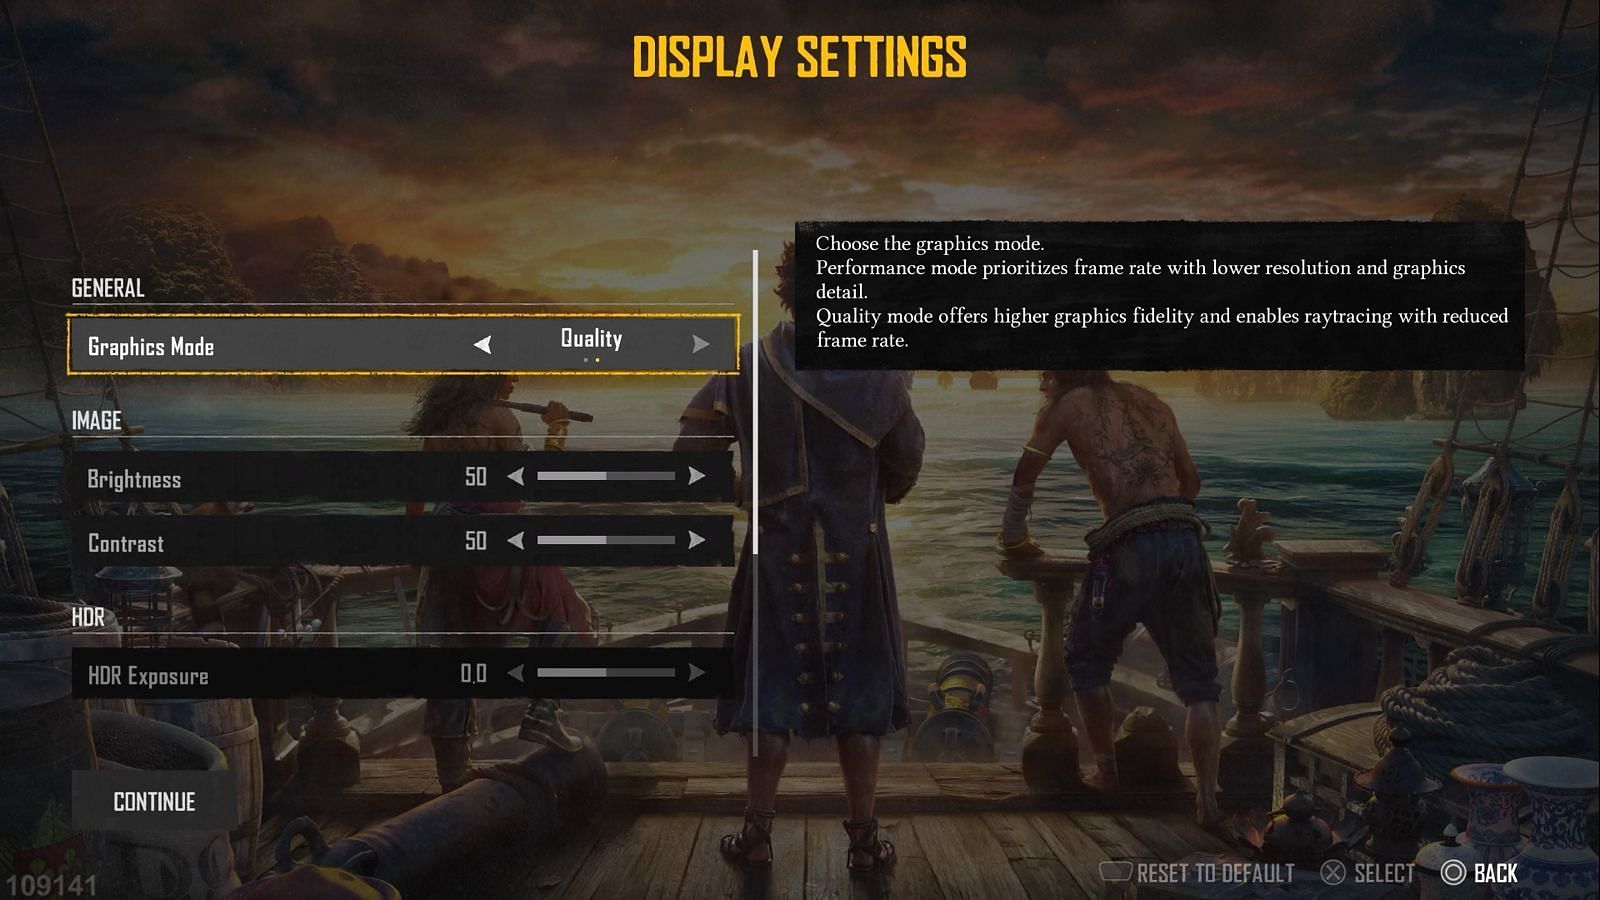 The best Skull and Bones settings for display and graphics. (Image via Ubisoft)